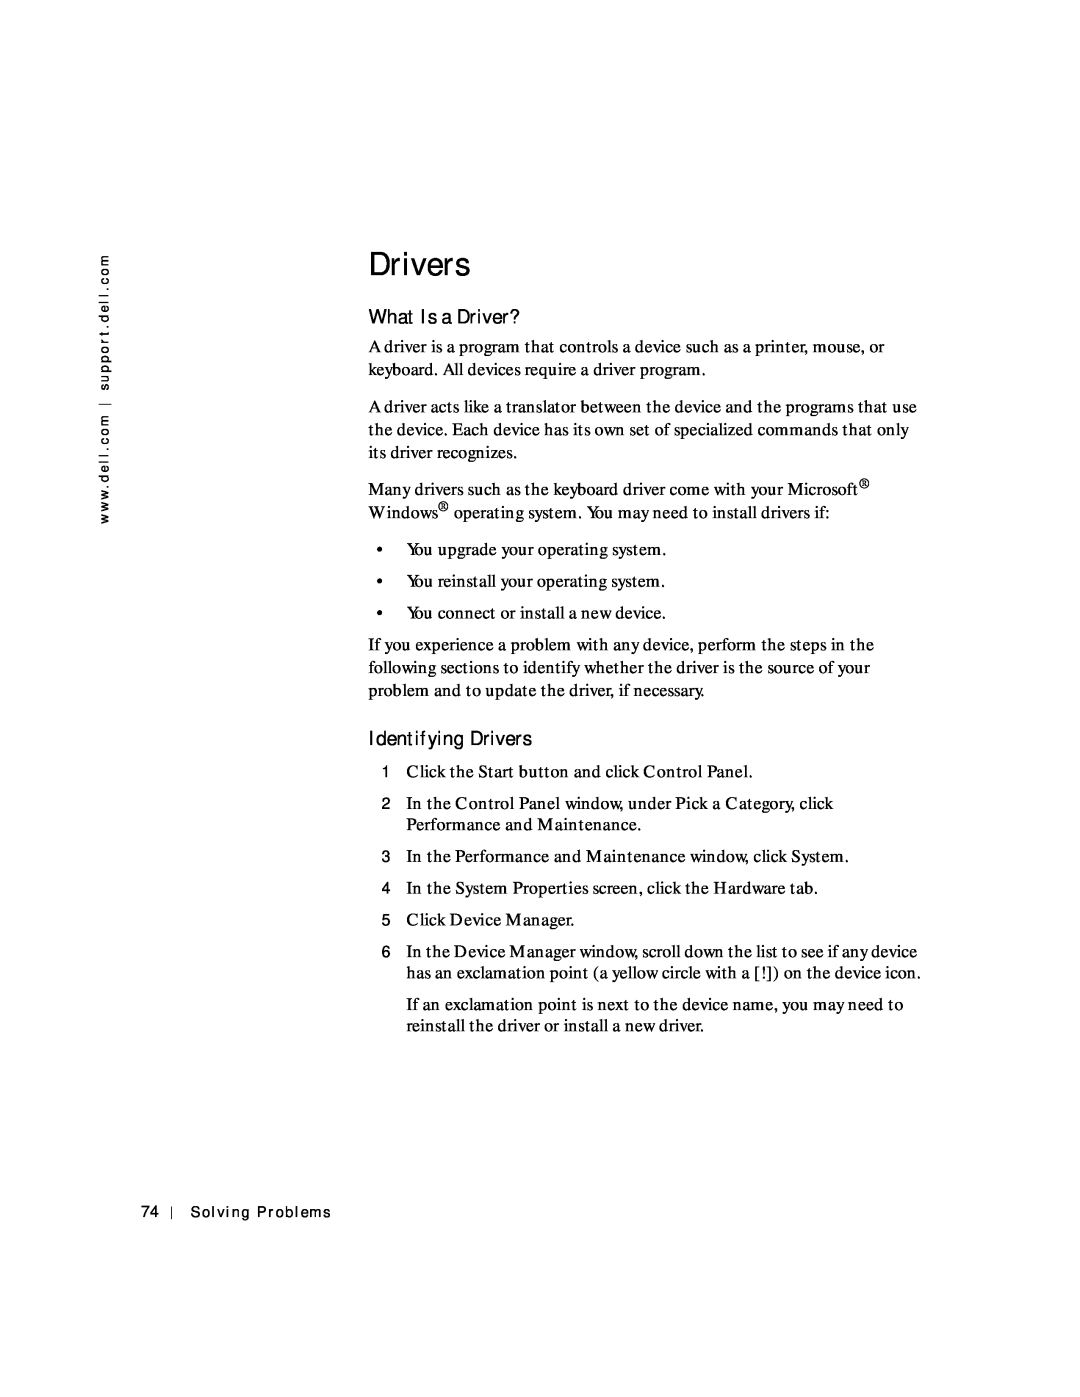 Dell 4150 owner manual What Is a Driver?, Identifying Drivers, In the Performance and Maintenance window, click System 